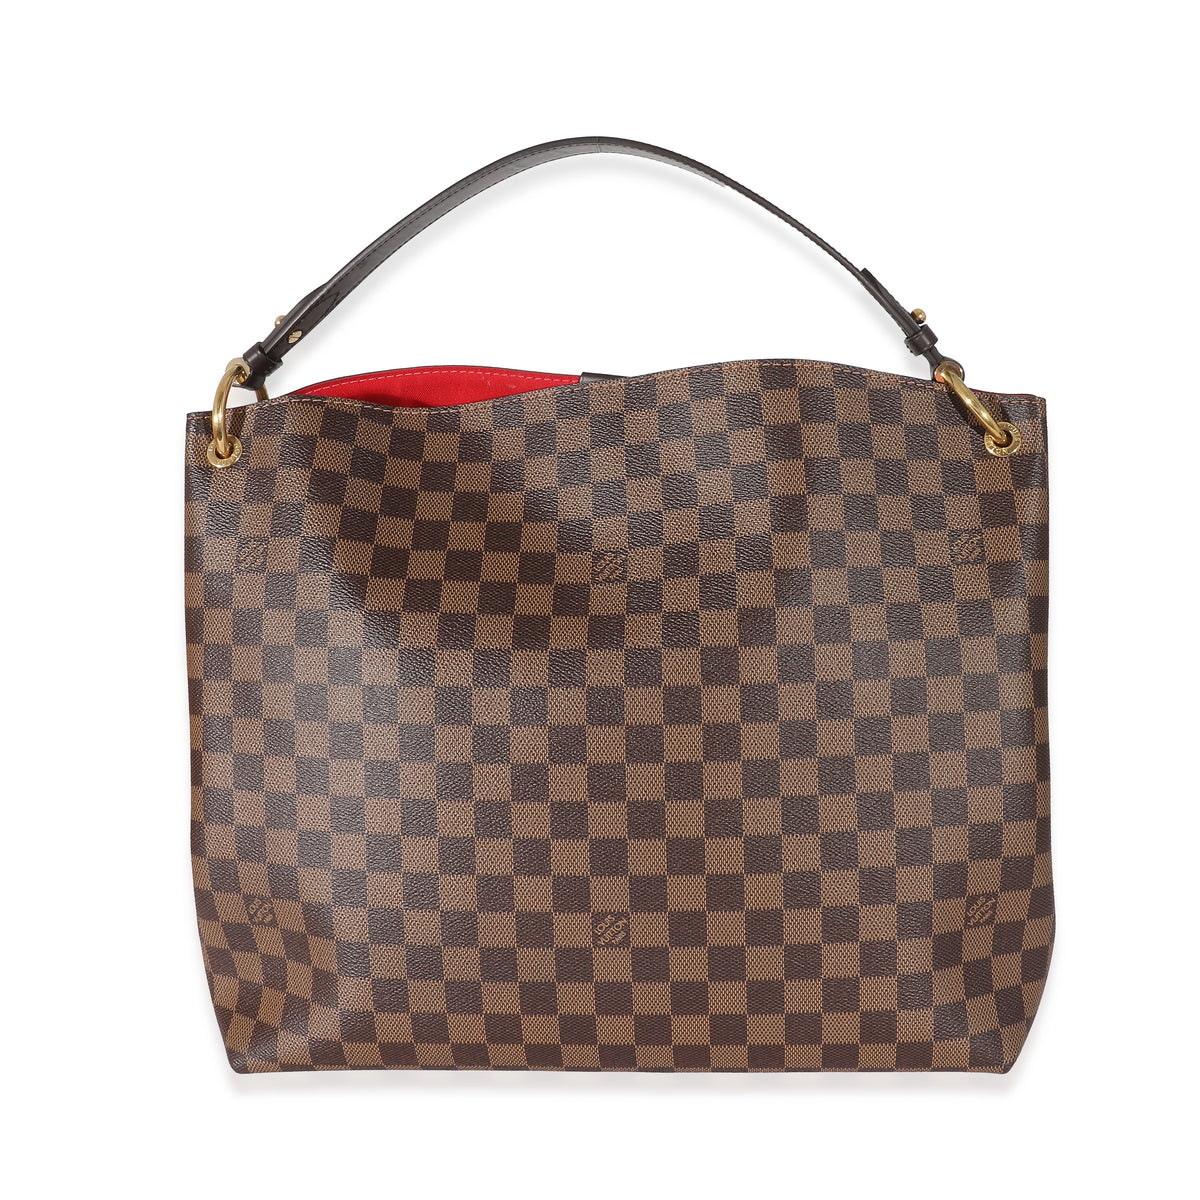 Early checkerboard Damier Canvas Louis Vuitton Trunk Circa 1890s - Leather  Storage & Accessories